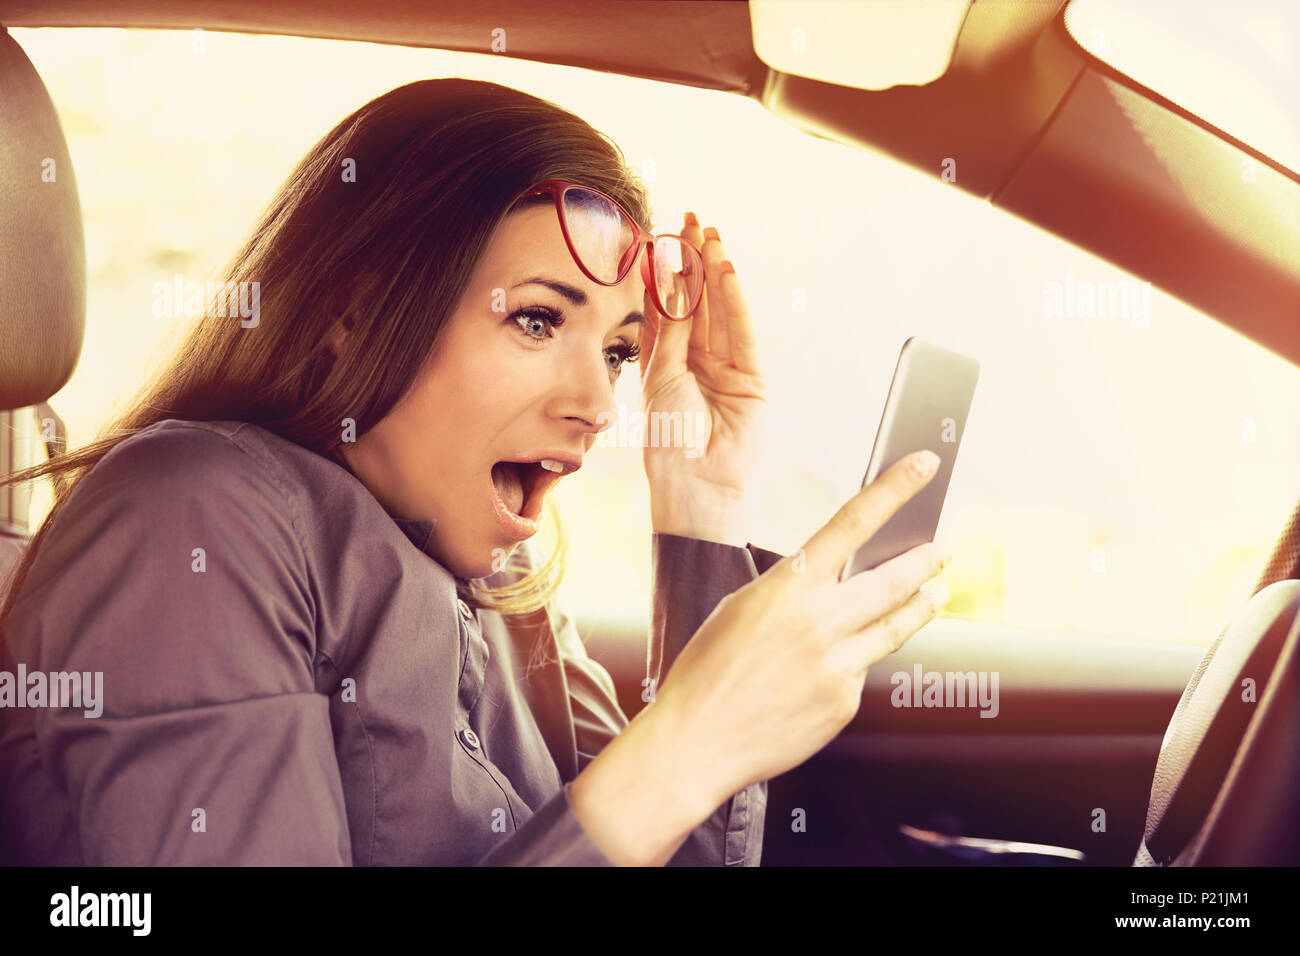 young woman distracted reading a message on cellphone, amazed, while driving a car Stock Photo